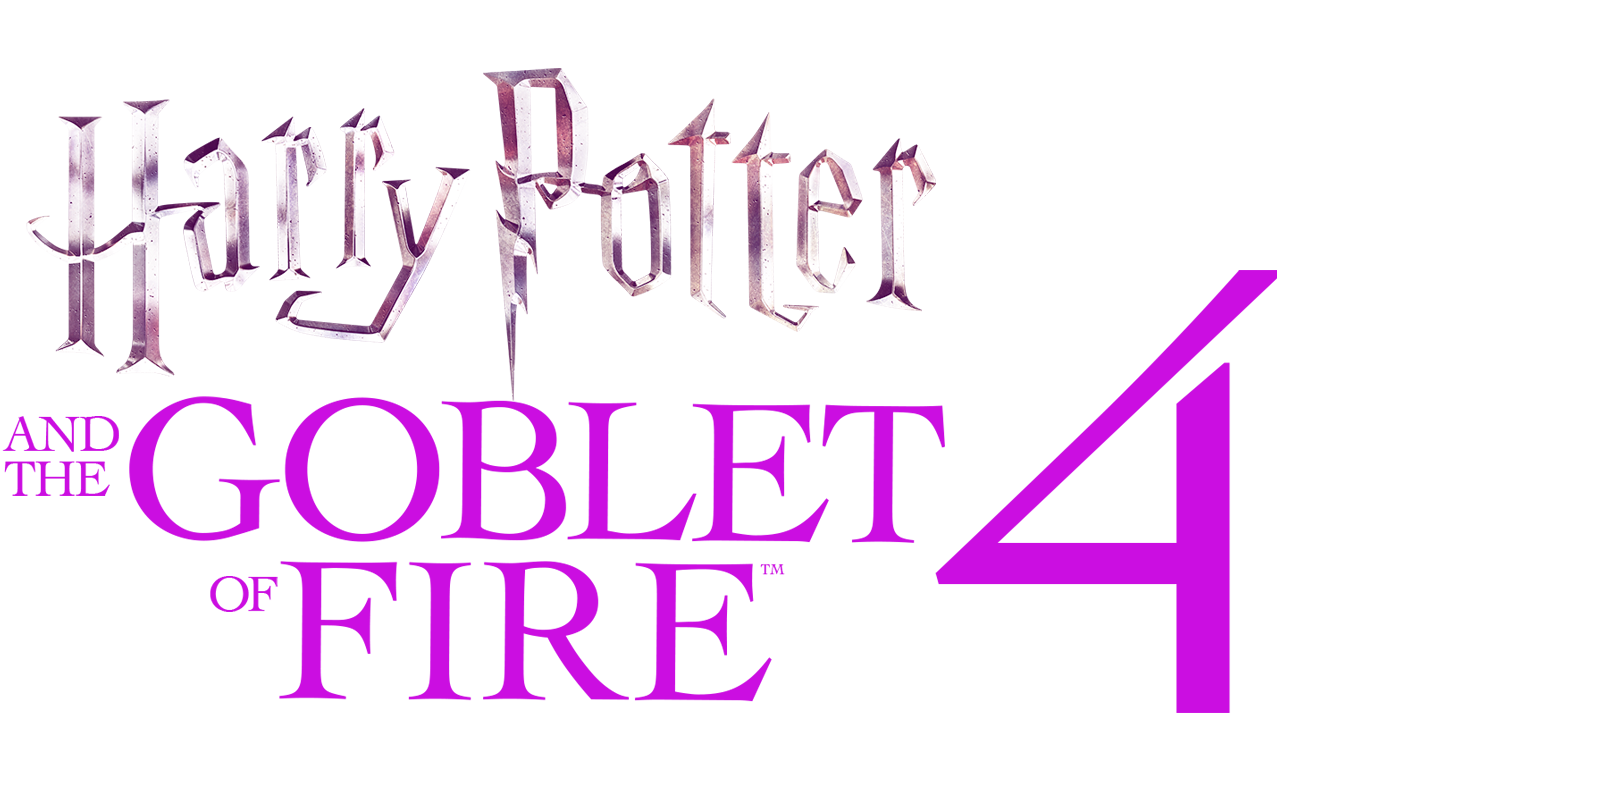 harry potter and the global of fire full movie